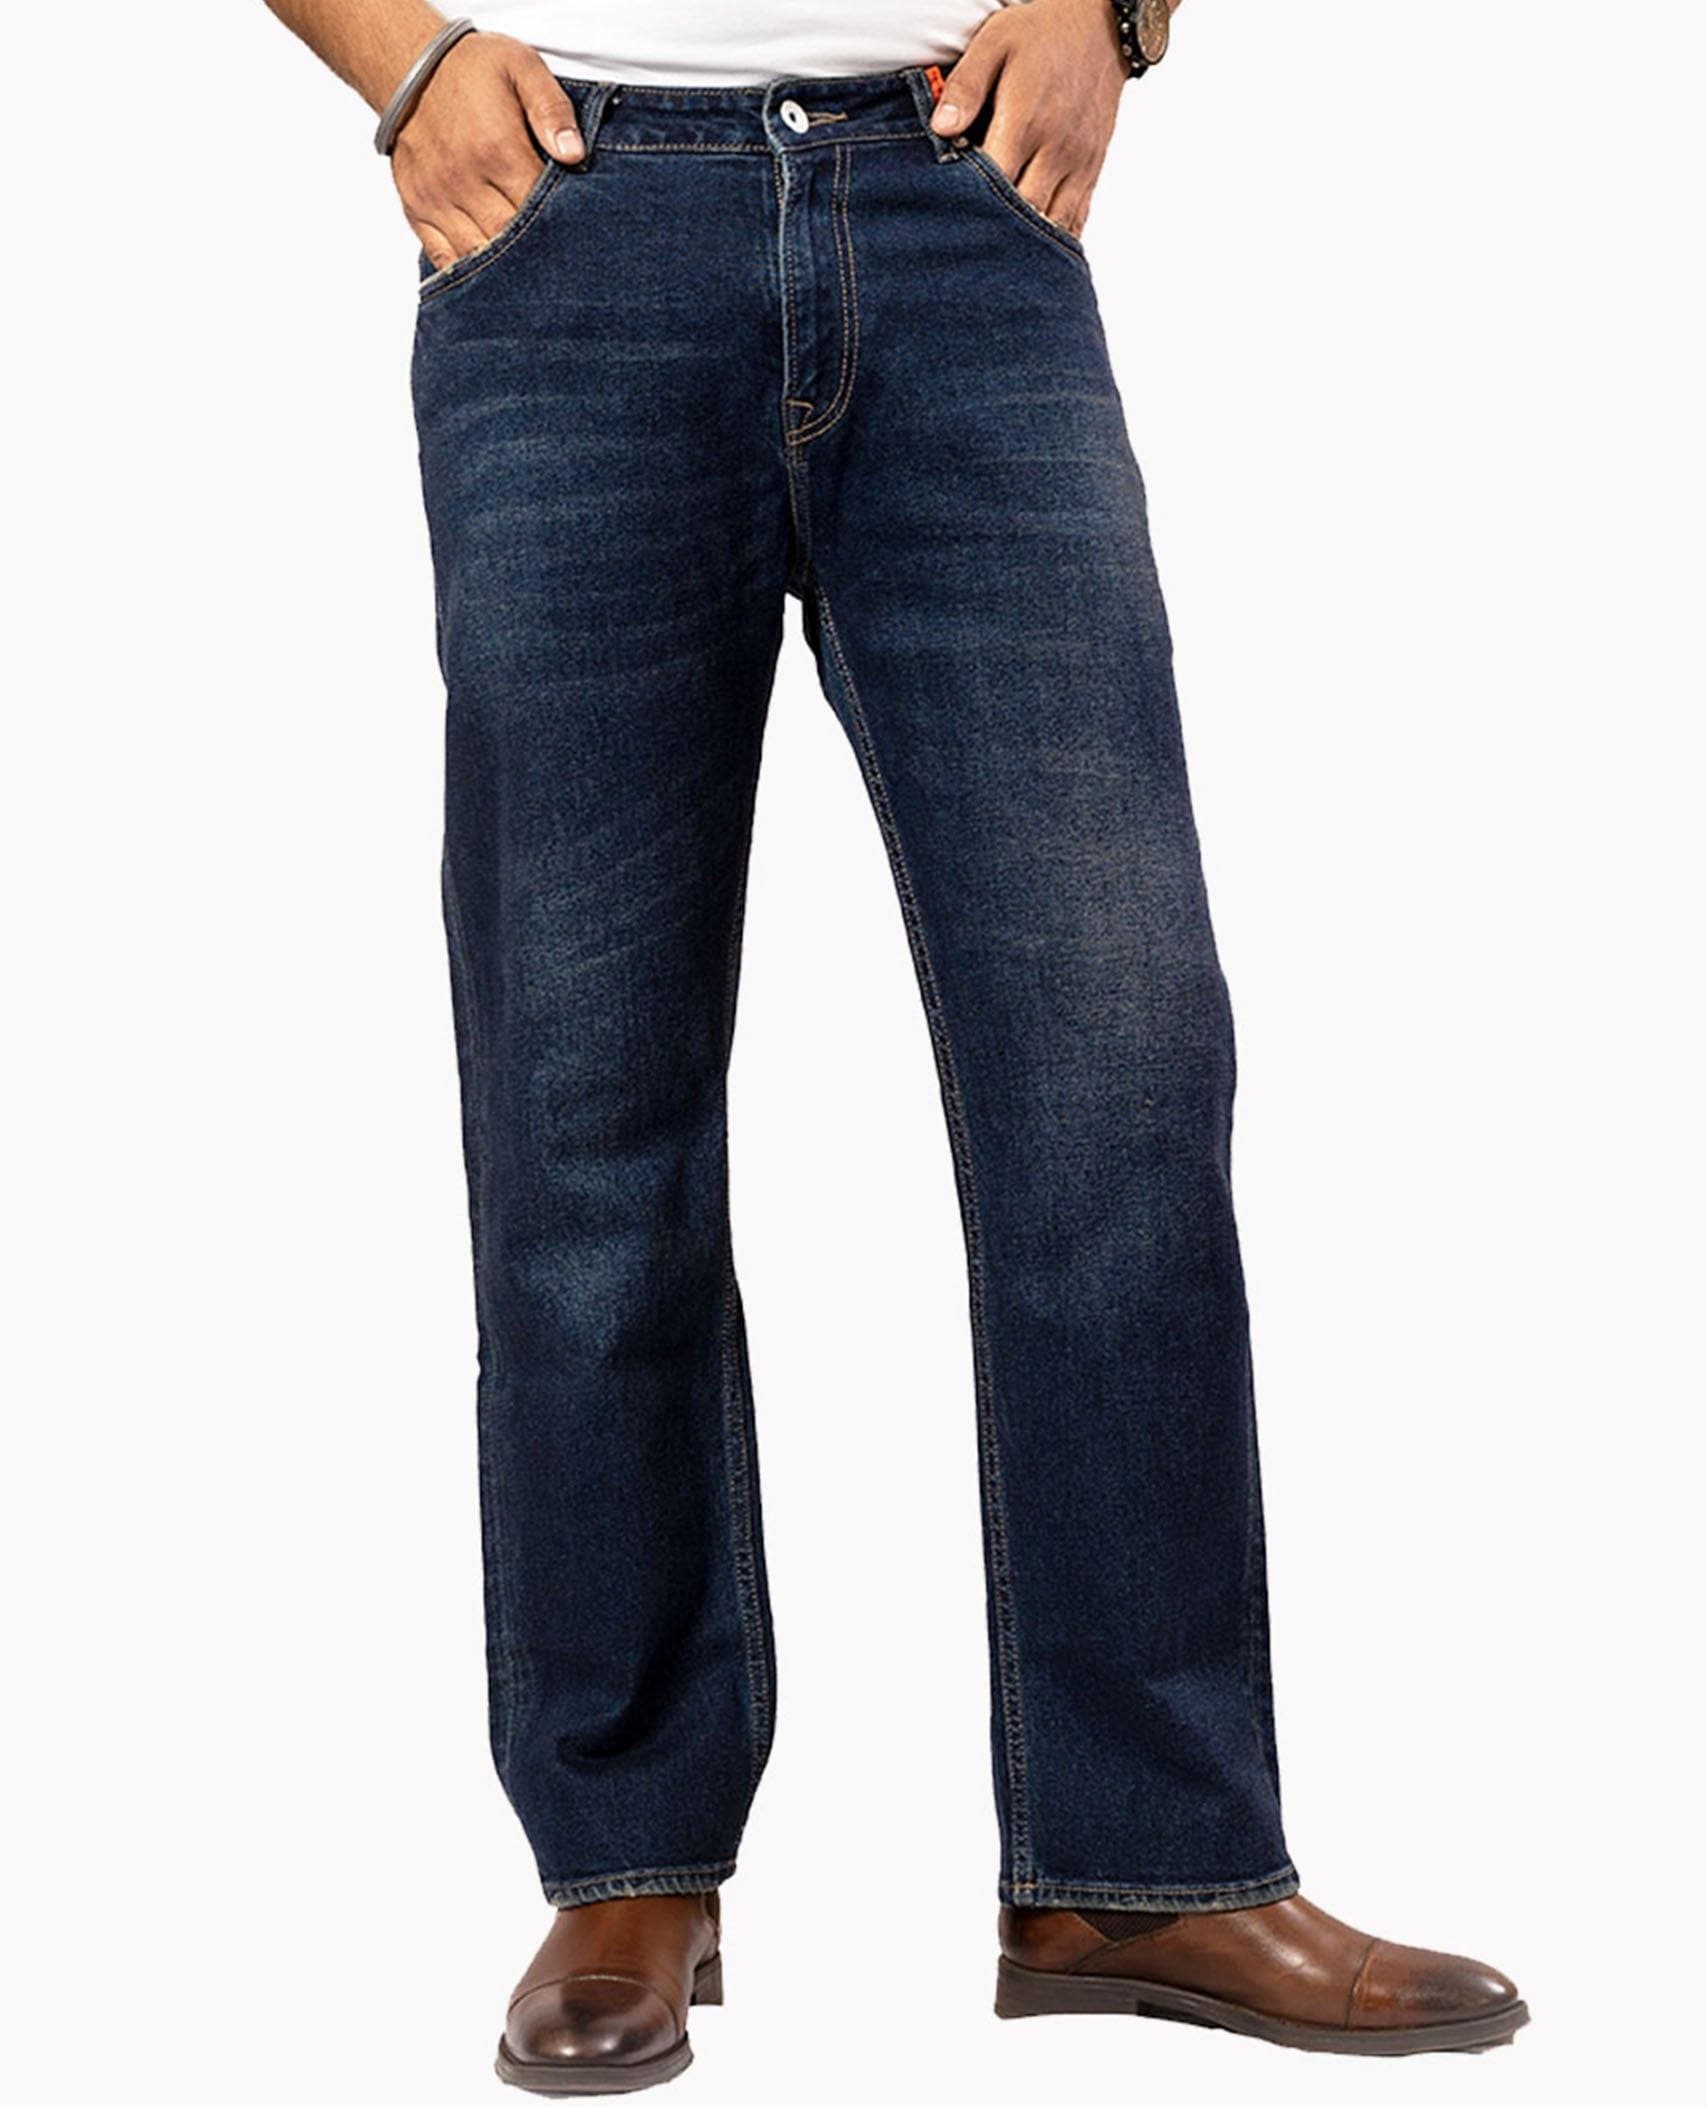 Levi's® Mens 559™ Relaxed Straight Fit Jeans - Stretch - JCPenney